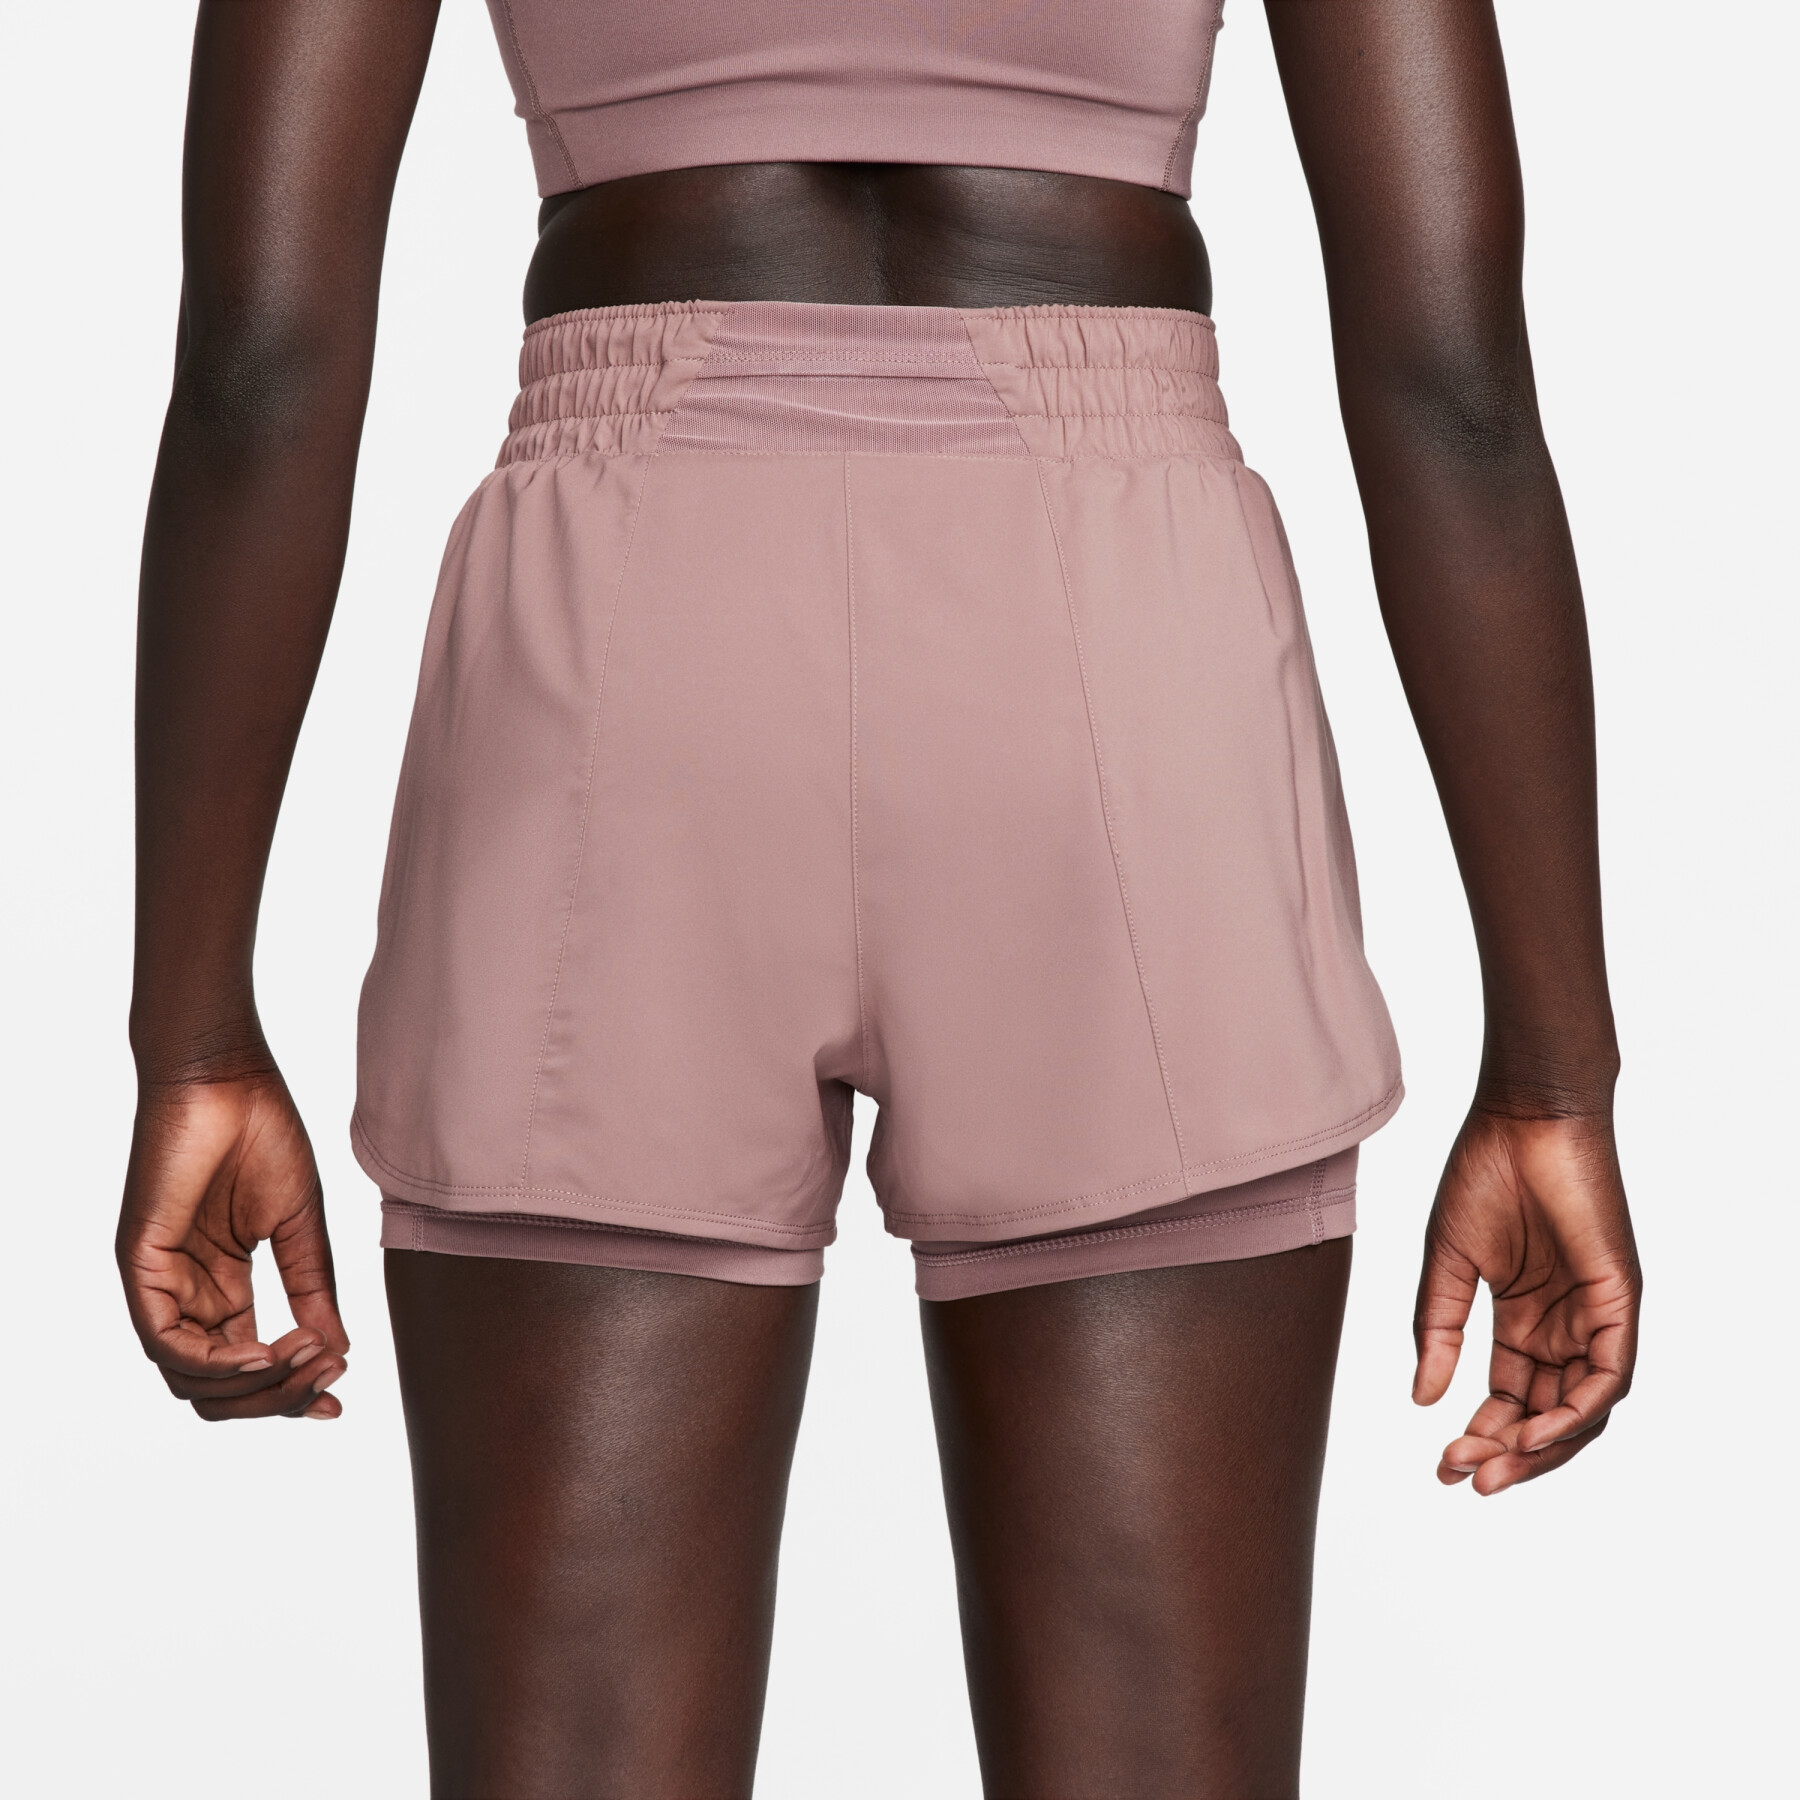 Women's 2-in-1 high-waisted shorts Nike One Dri-FIT